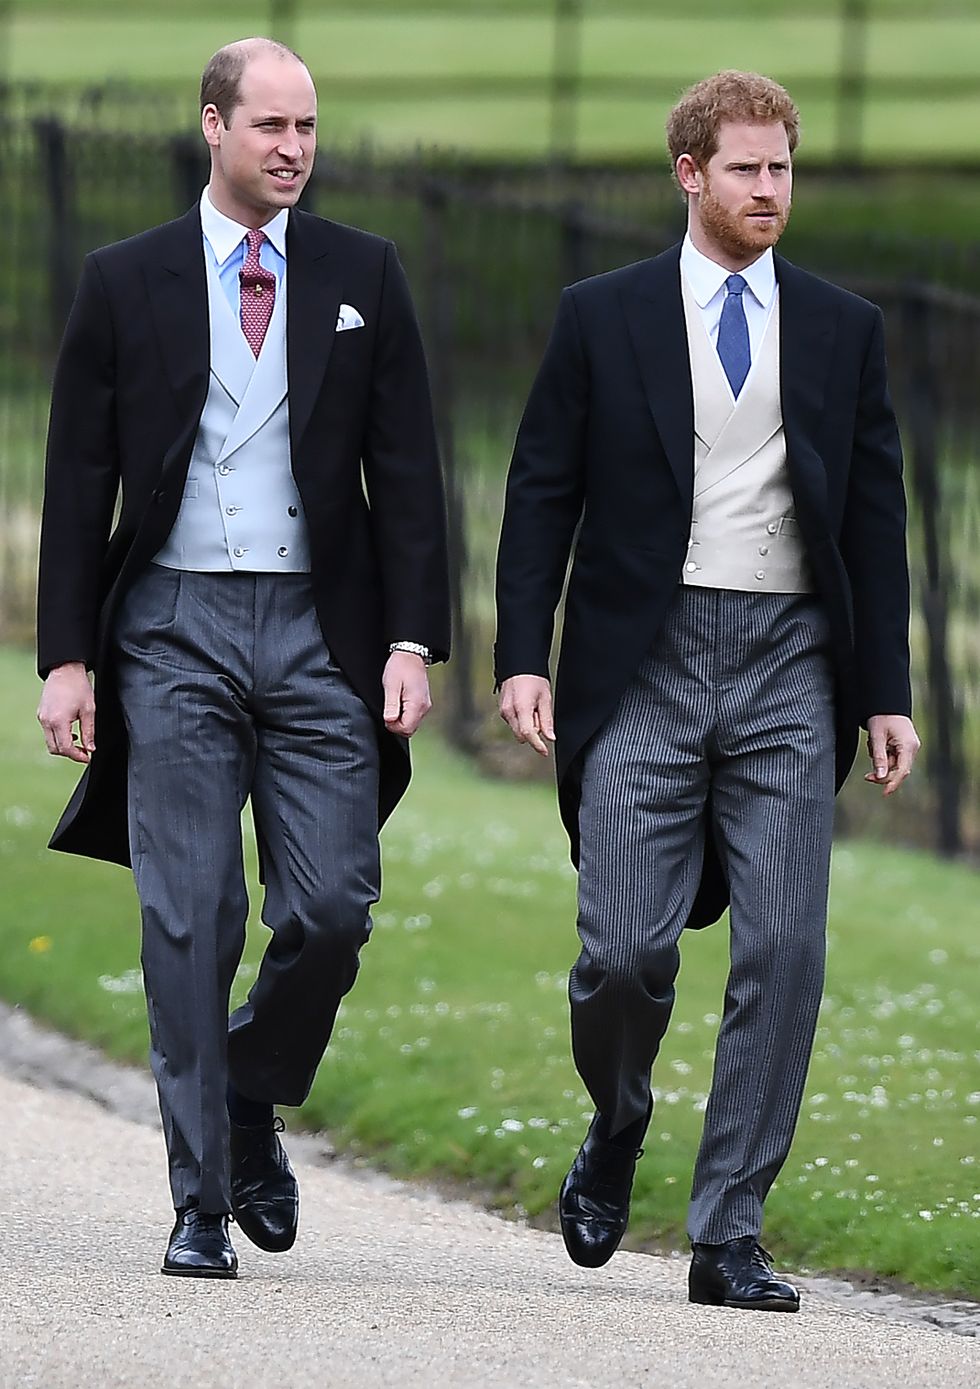 englefield green, england   may 20  britains prince harry r and britains prince william, duke of cambridge attend the wedding of pippa middleton and james matthews at st marks church on may 20, 2017 in englefield green, england  photo by justin tallis   wpa poolgetty images